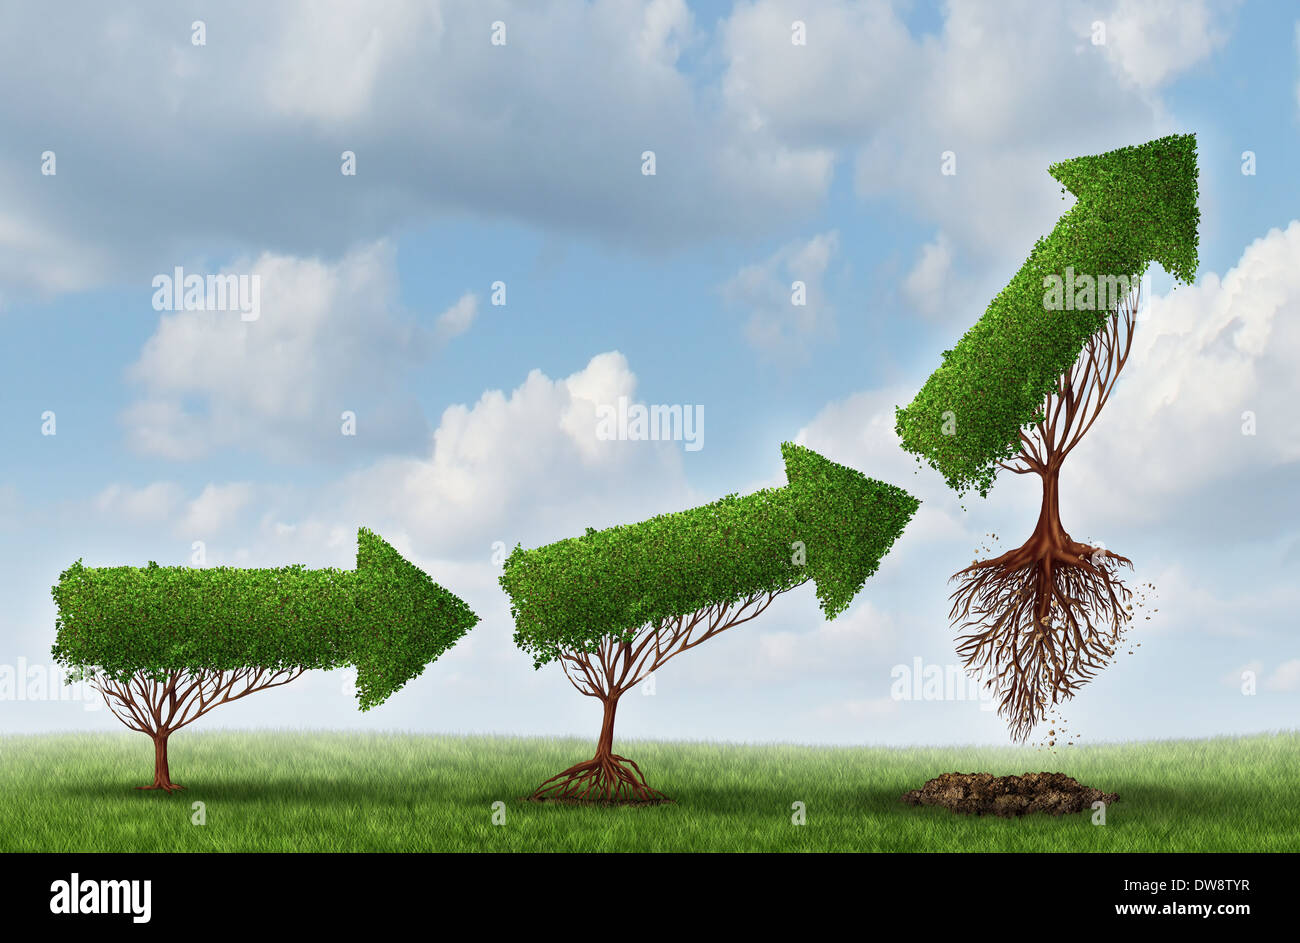 Business launch success symbol as a group of trees shaped as an arrow gradually maturing lifting off upward as a metaphor for so Stock Photo